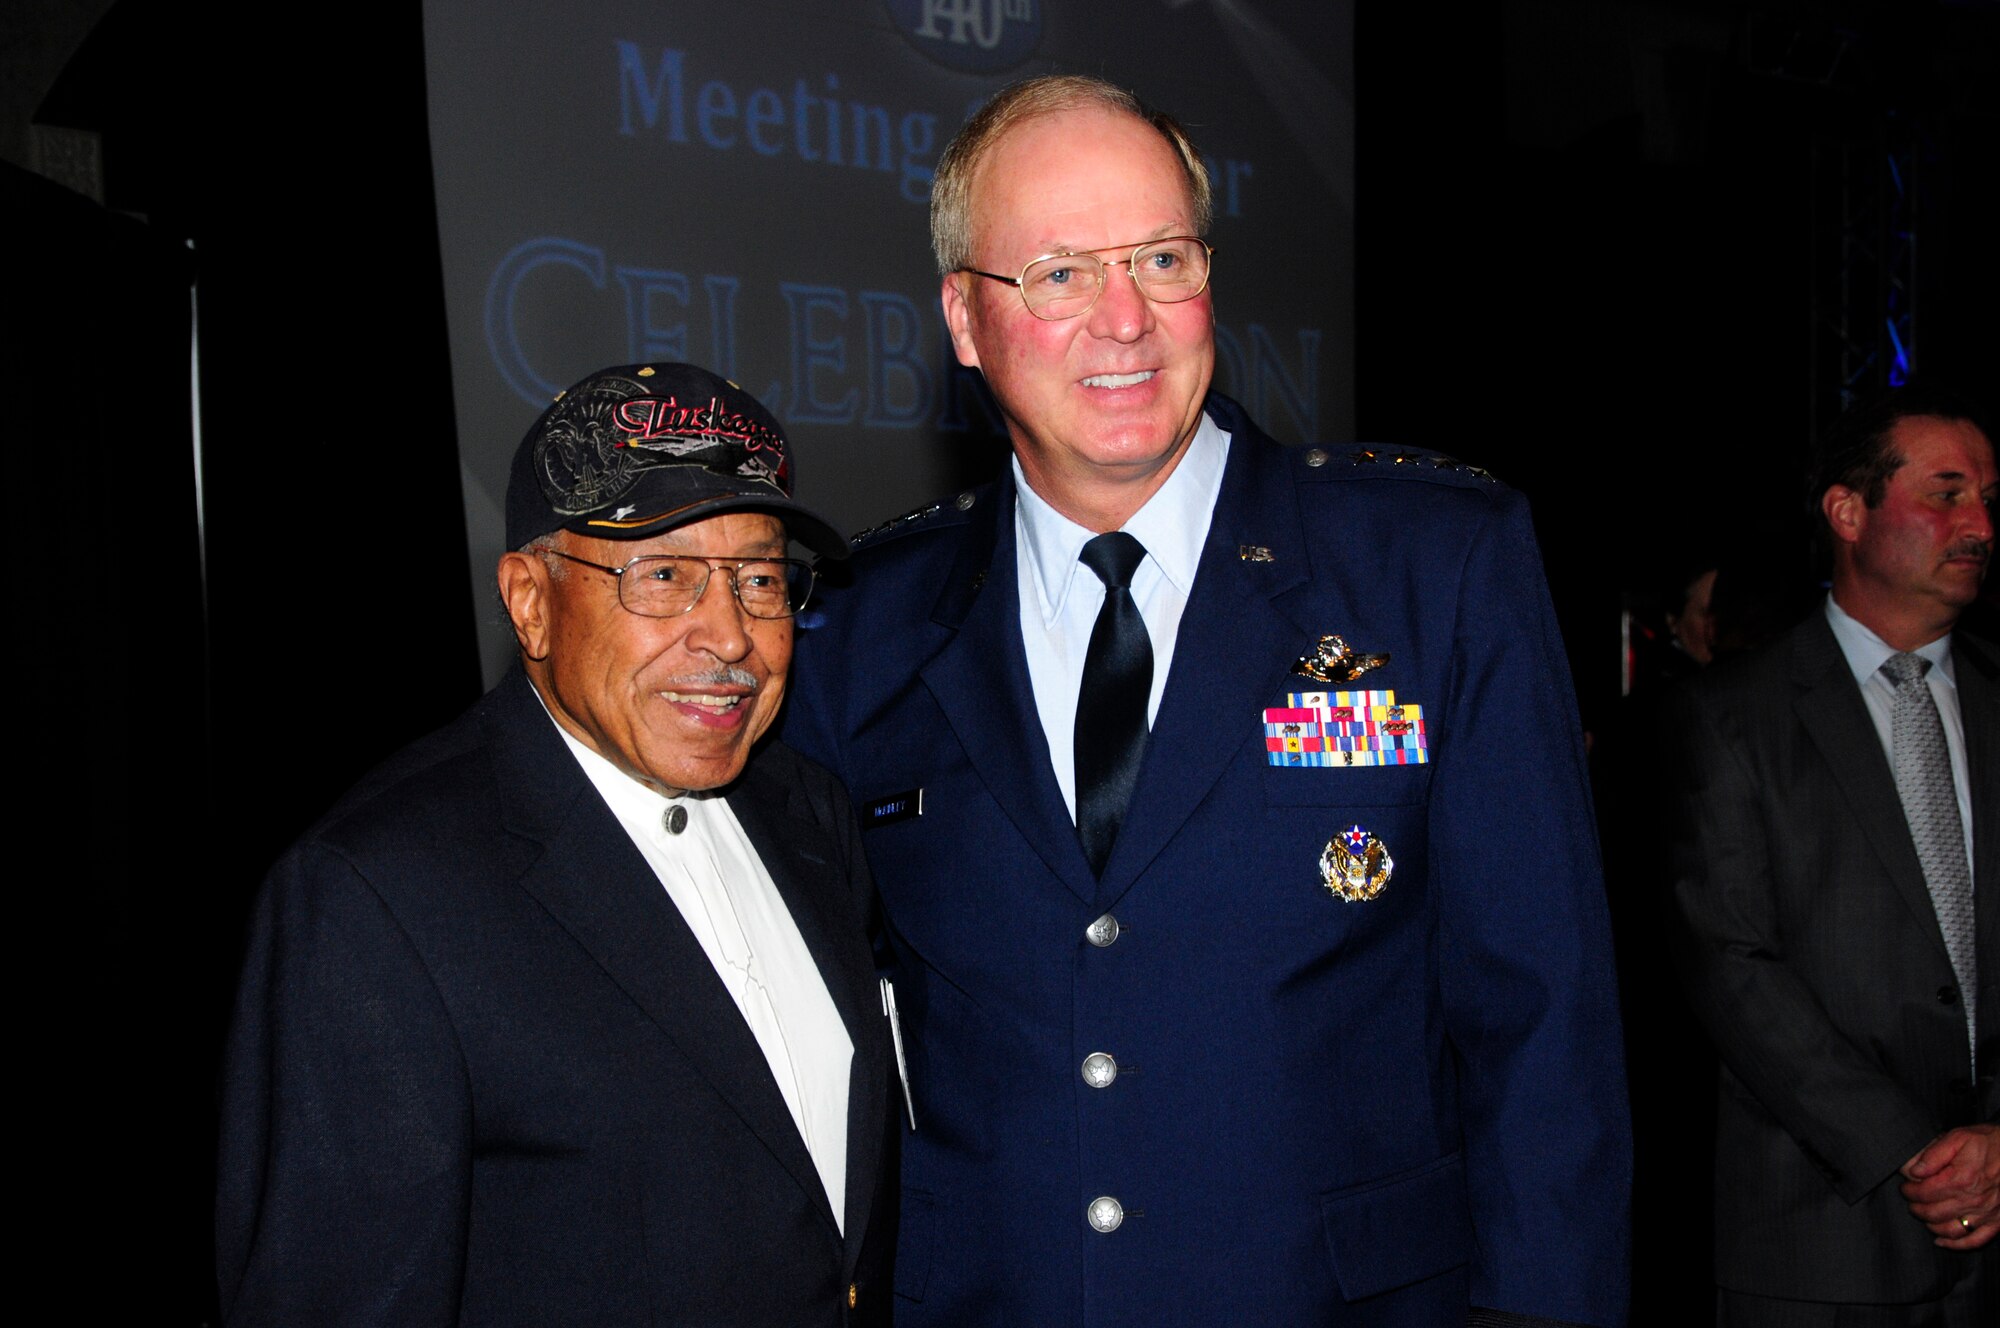 General Craig McKinley, chief of the National Guard Bureau, and former Tuskegee Airman and Pilot, Major Joe Gomer, pose for a photo together while at the annual Chamber of Commerce Dinner and Gala held on Oct. 21, 2010 at the Duluth Entertainment and Convention Center in Duluth, Minn.  Gen. McKinley was the keynote speaker for the event and spoke highly of 148th accomplishments, and the communities' positive support of military members.  He also recognized Maj. Joseph Gomer, a Duluth resident in attendance who served as a fighter pilot with World War II's famed Tuskegee Airmen.    (U.S. Air Force photo by MSgt Ralph Kapustka)